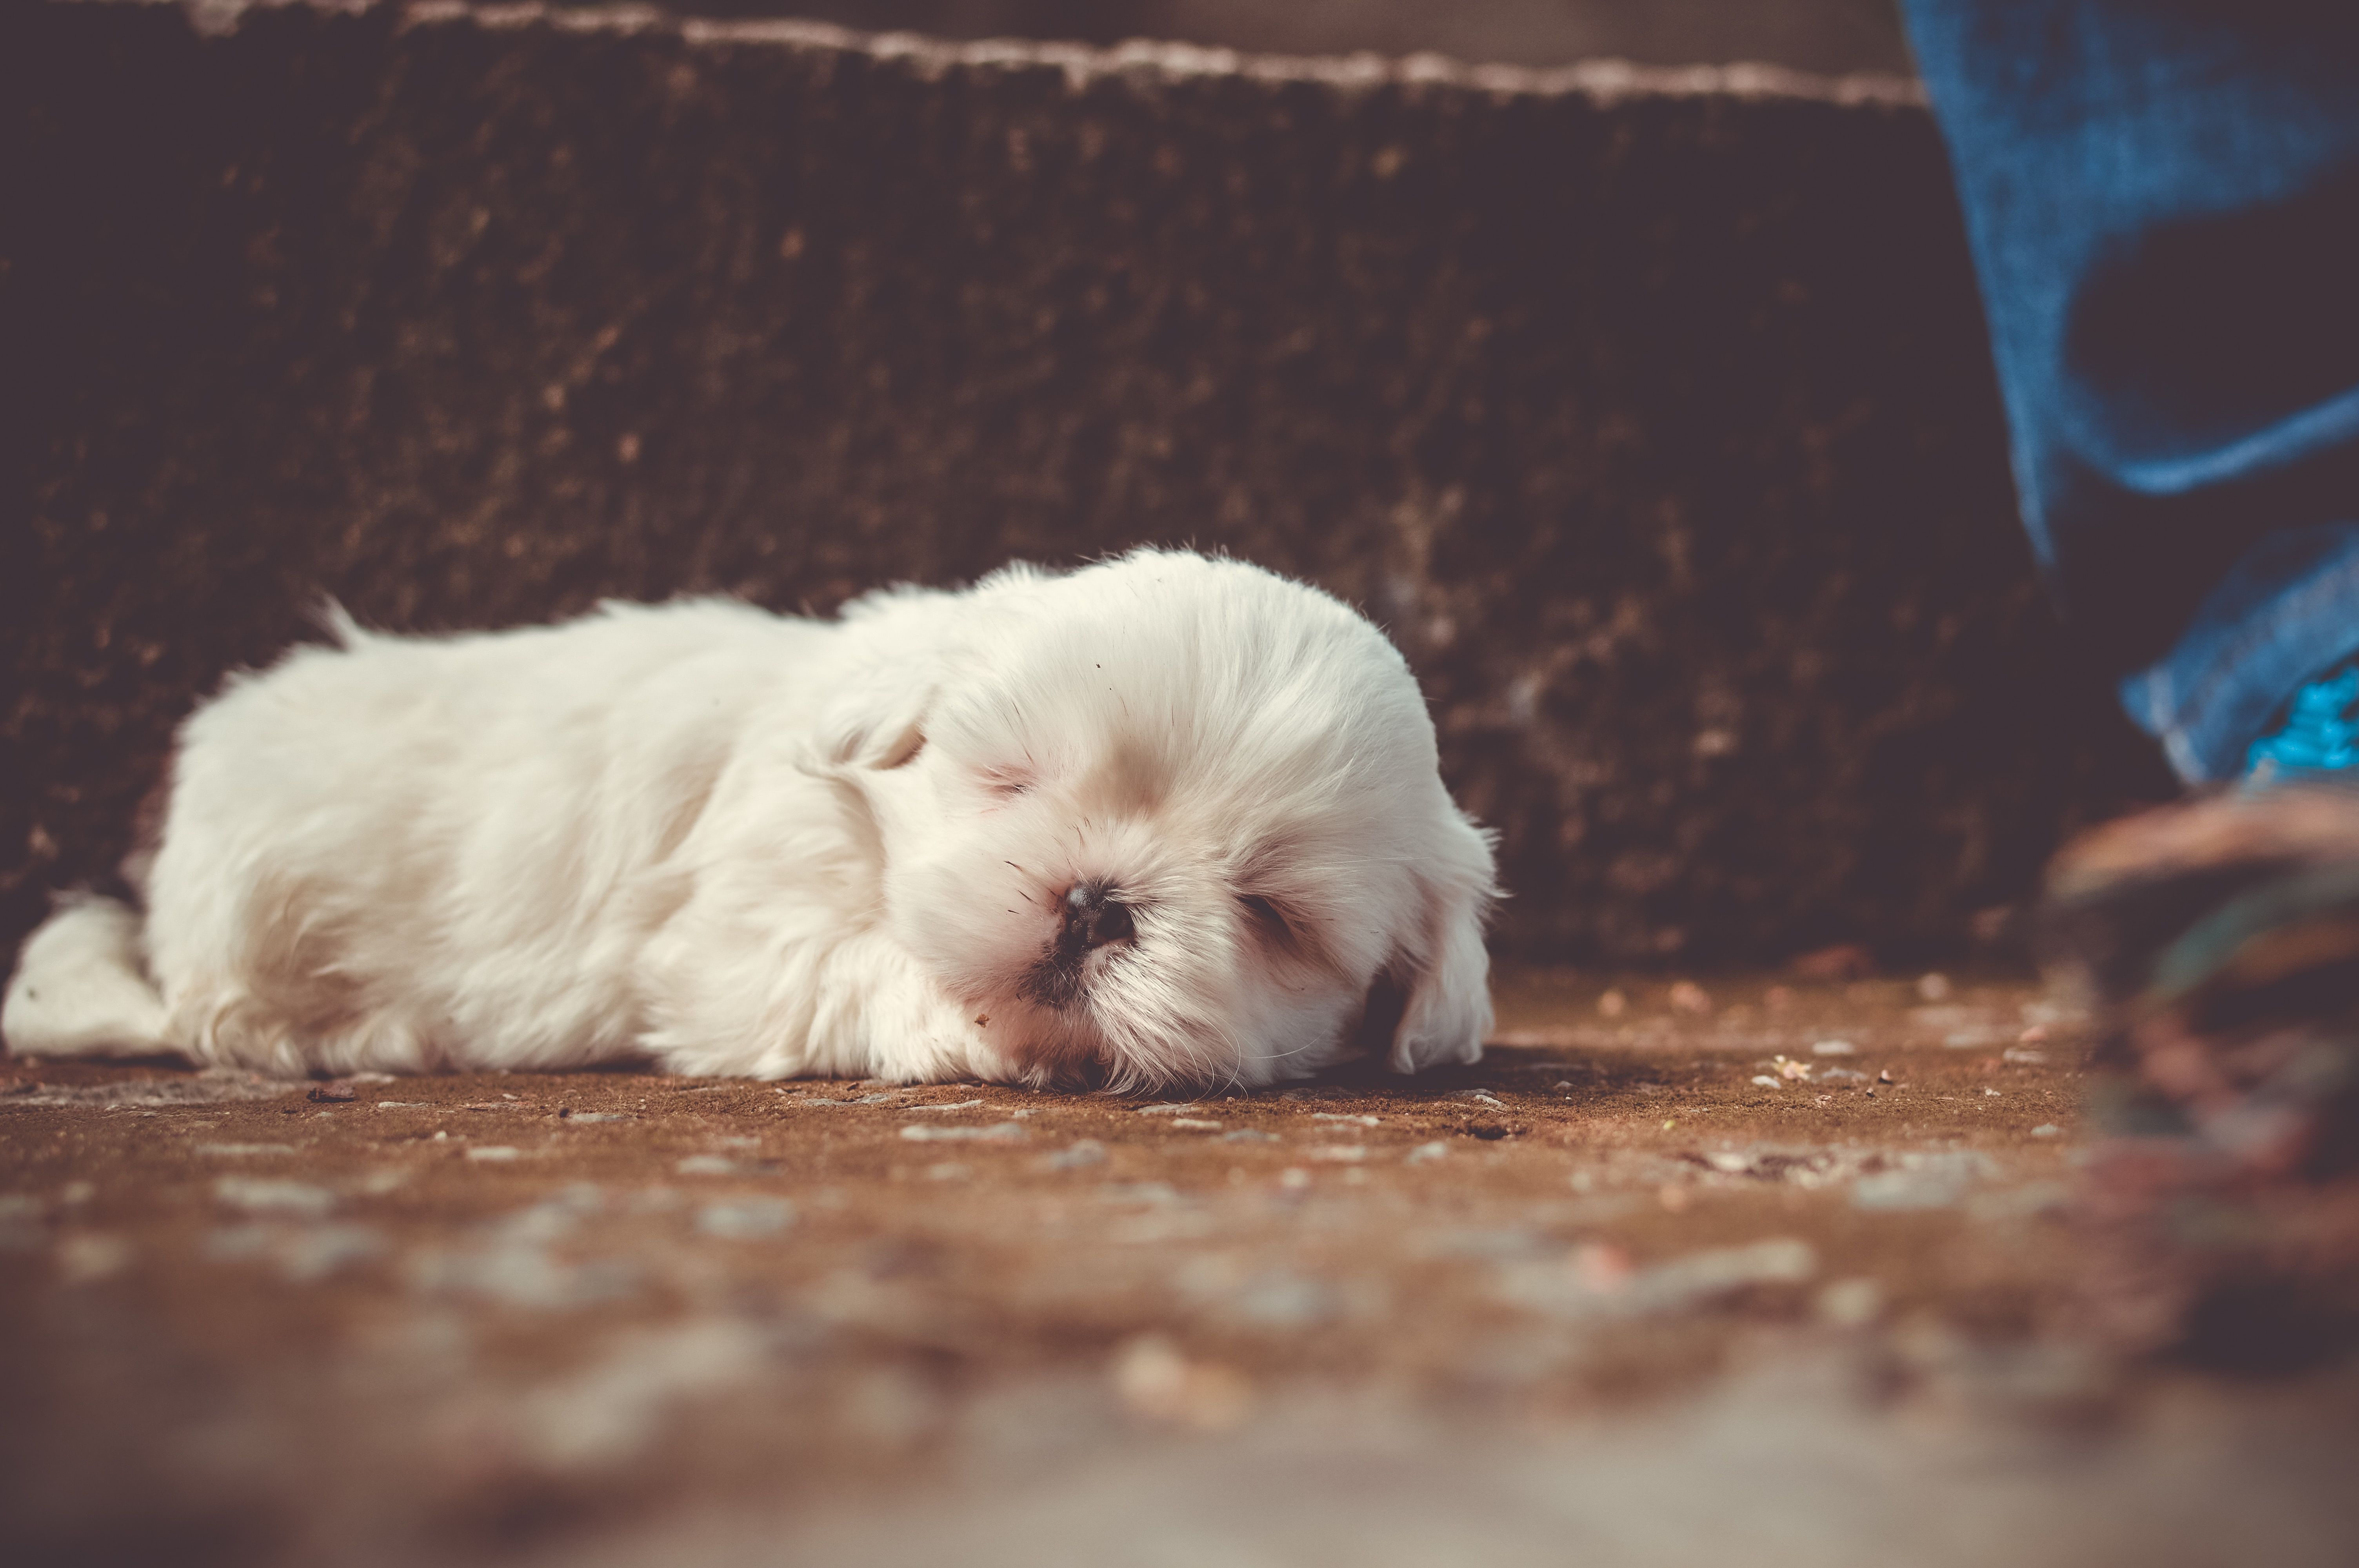 Download wallpaper 4k, Shih tzu, puppy, sleeping dog, pets, fluffy dog, cute animals, dogs, Shih tzu Dog, white puppy for desktop with resolution 6016x4000. High Quality HD picture wallpaper